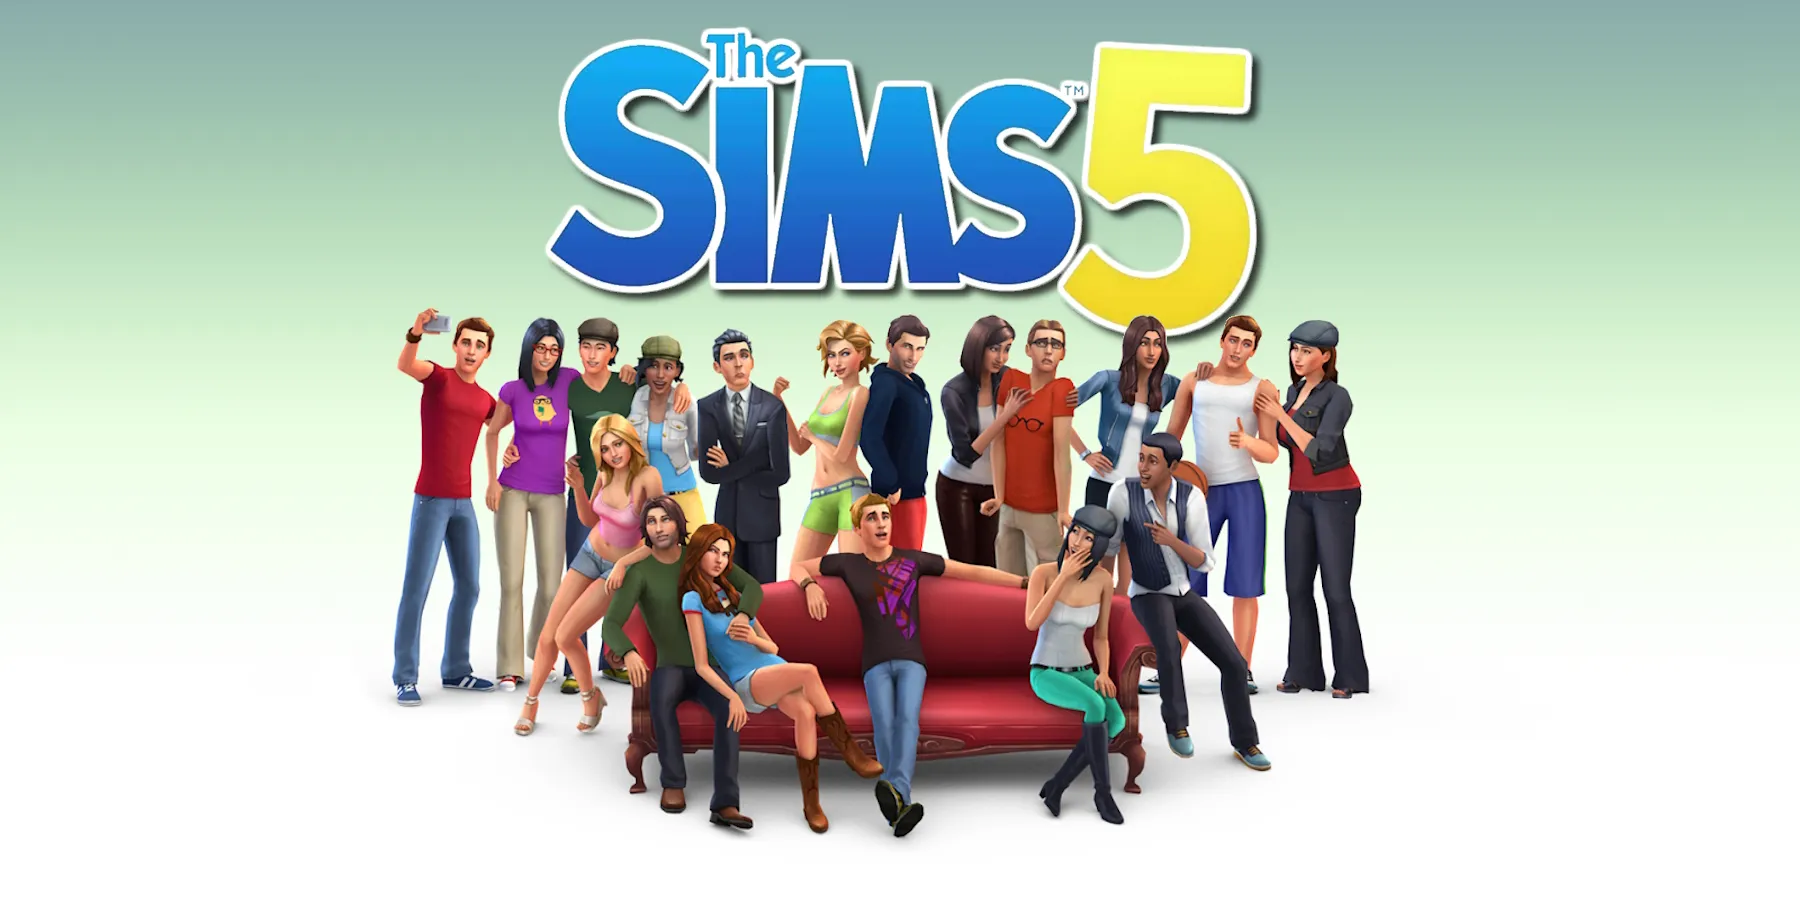 Exciting Update The Sims 5's Journey to Release - What Gamers Need to Know---